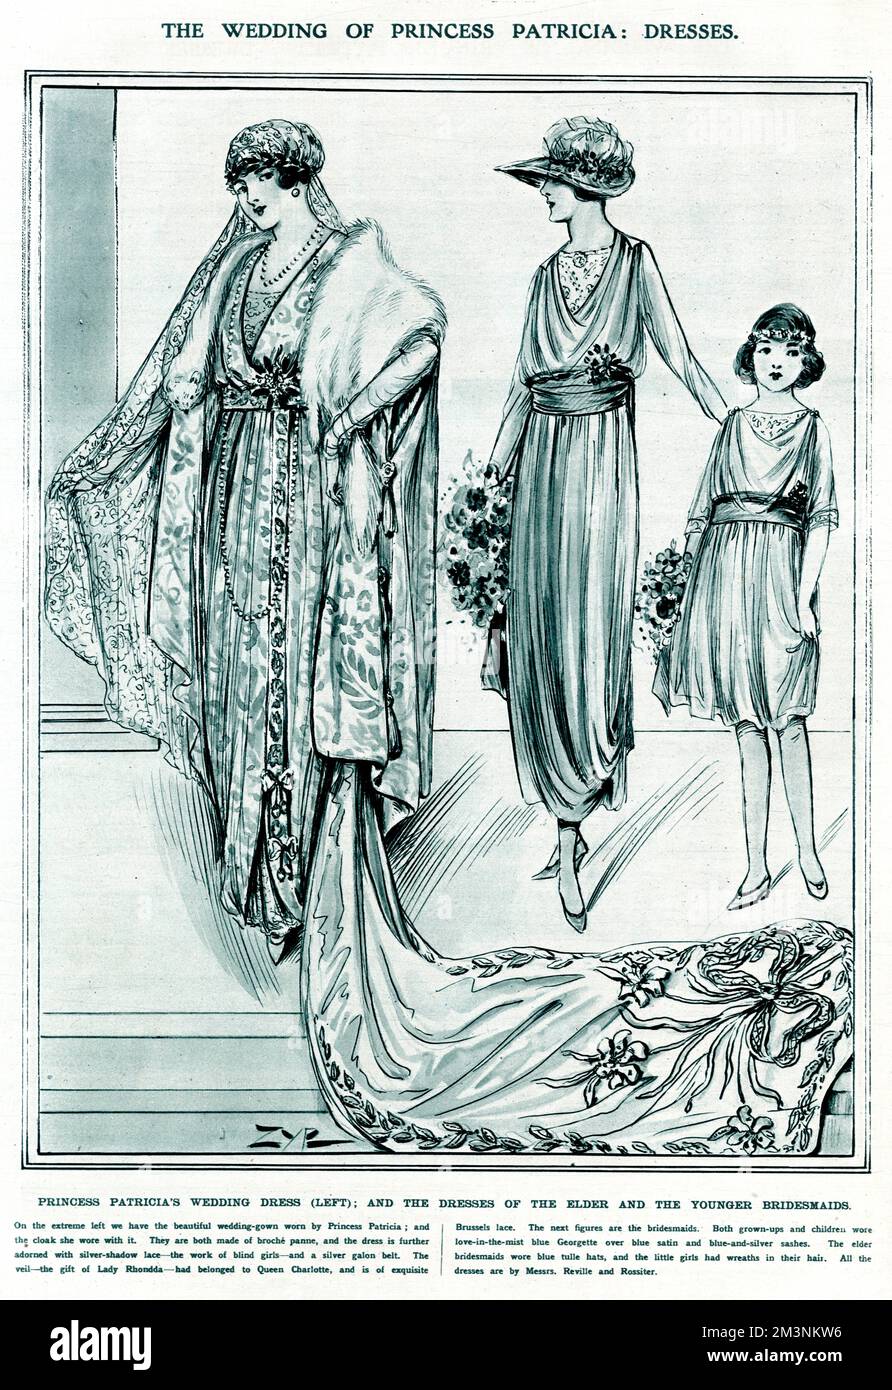 Princess Patricia of Connaught's wedding dress (left), and the dresses of the elder and younger bridesmaids.  She married Commander Alexander Ramsay RN on 27 February 1919.  Her dress was in Venetian style, made of white broche panne on an underdress of silver lace, and the train was made of rich cloth of silver, embroidered with a lily design.  The bridesmaids' dresses were in love-in-the-mist blue georgette over blue satin.  All of the dresses were by Messrs Revill and Rossiter.  On her marriage Princess Patricia, a granddaughter of Queen Victoria, relinquished her royal title and became L Stock Photo